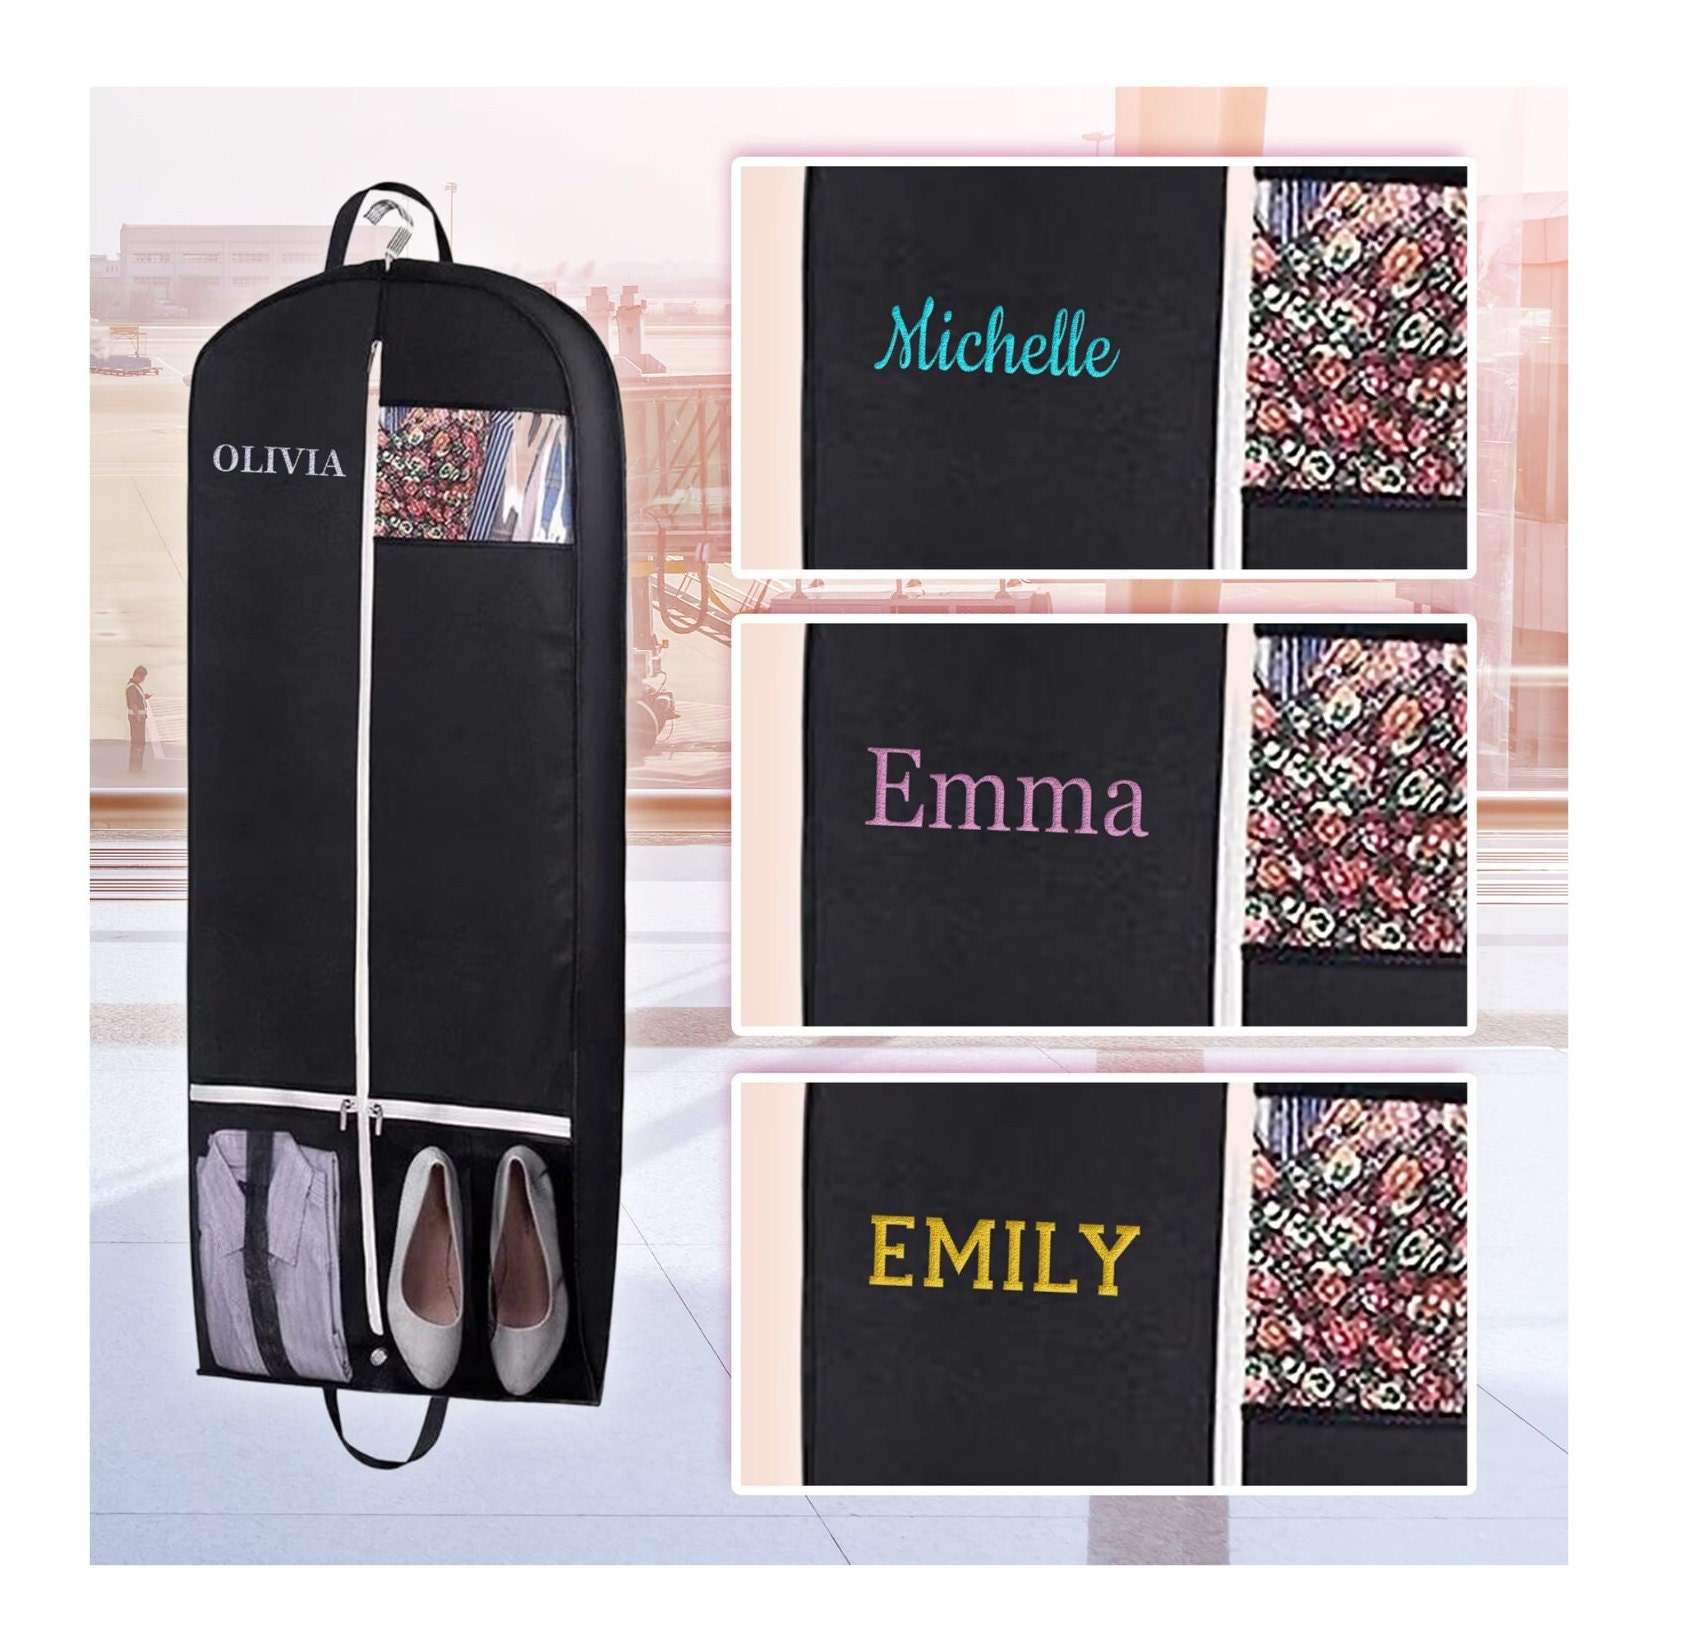  Personalized Planet 25x47 Travel Garment Bag with Custom  Monogram Embroidered on Black Luggage with Carry Handle and Main Zipper